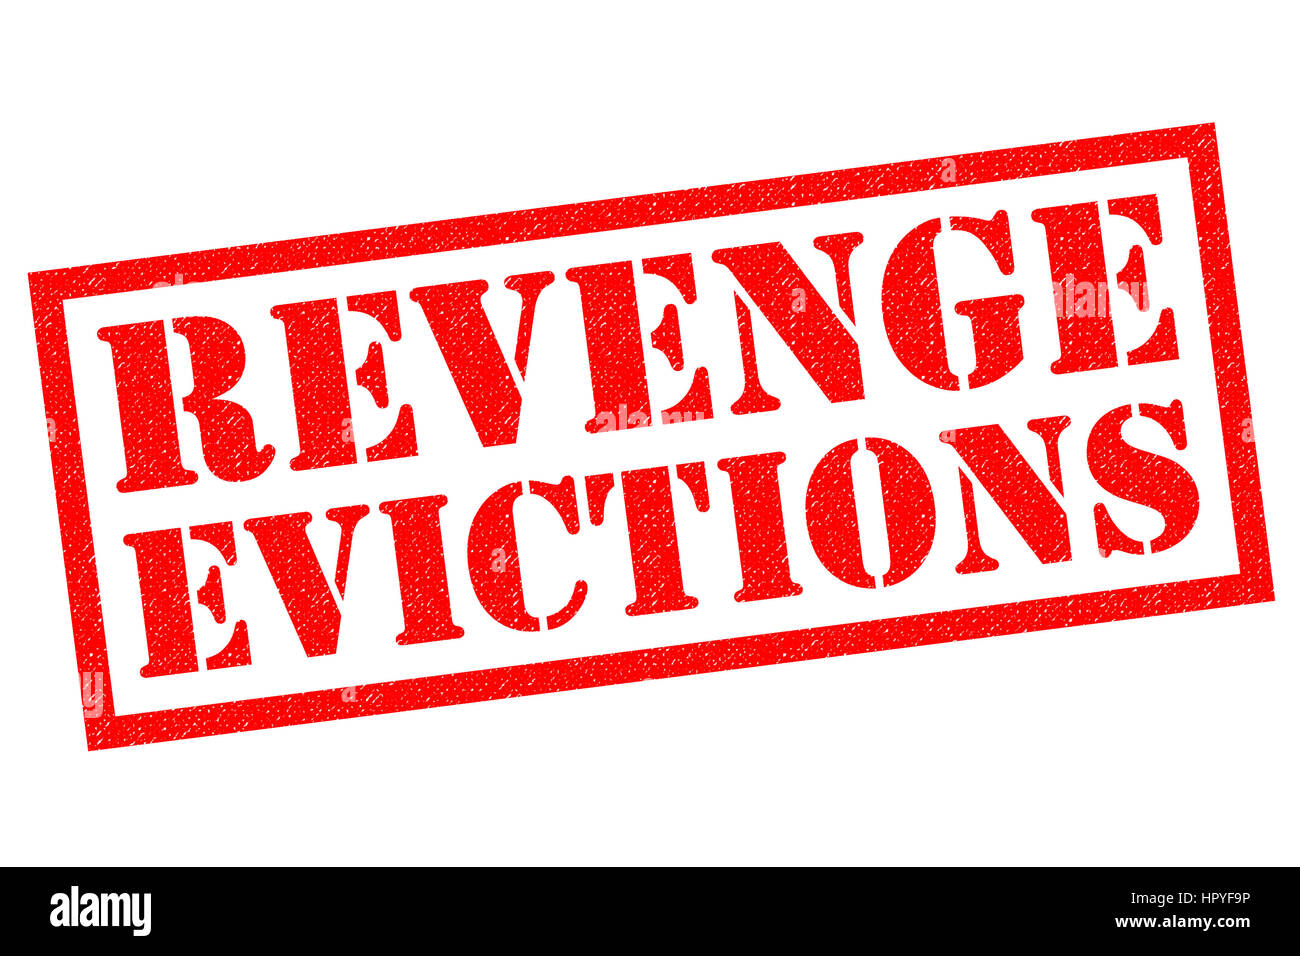 REVENGE EVICTIONS red Rubber Stamp over a white background. Stock Photo